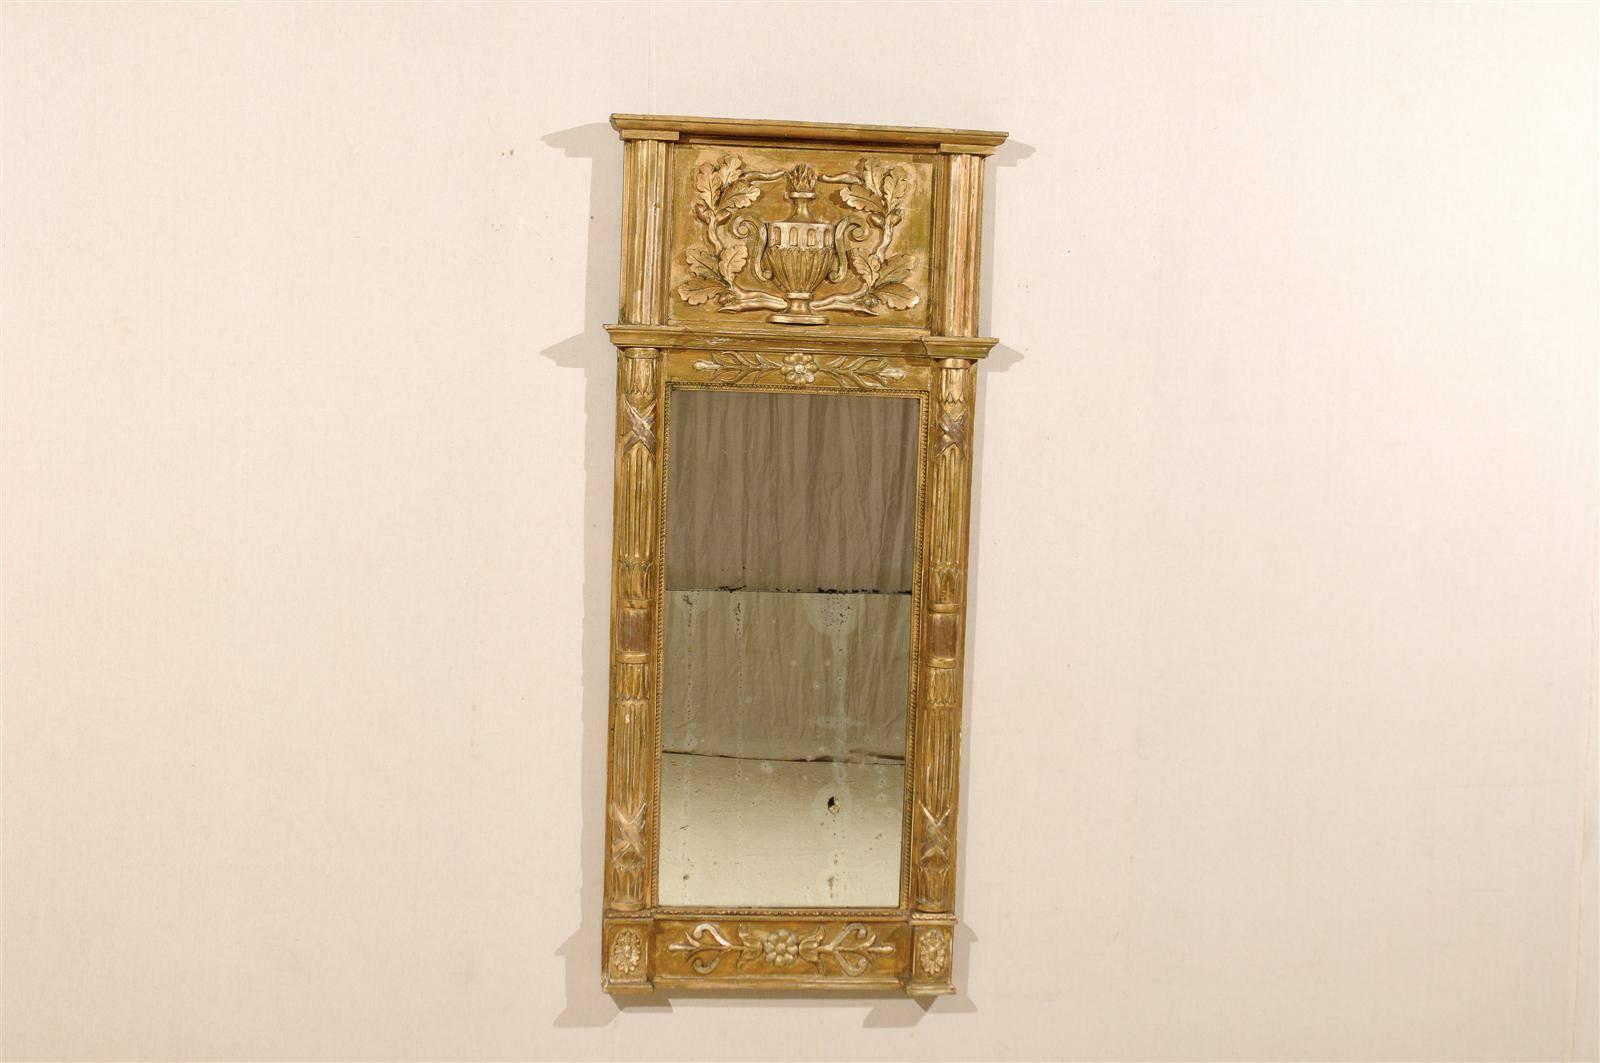 Gilt Swedish 19th Century Gilded Wood Mirror with Fire Urn Carving